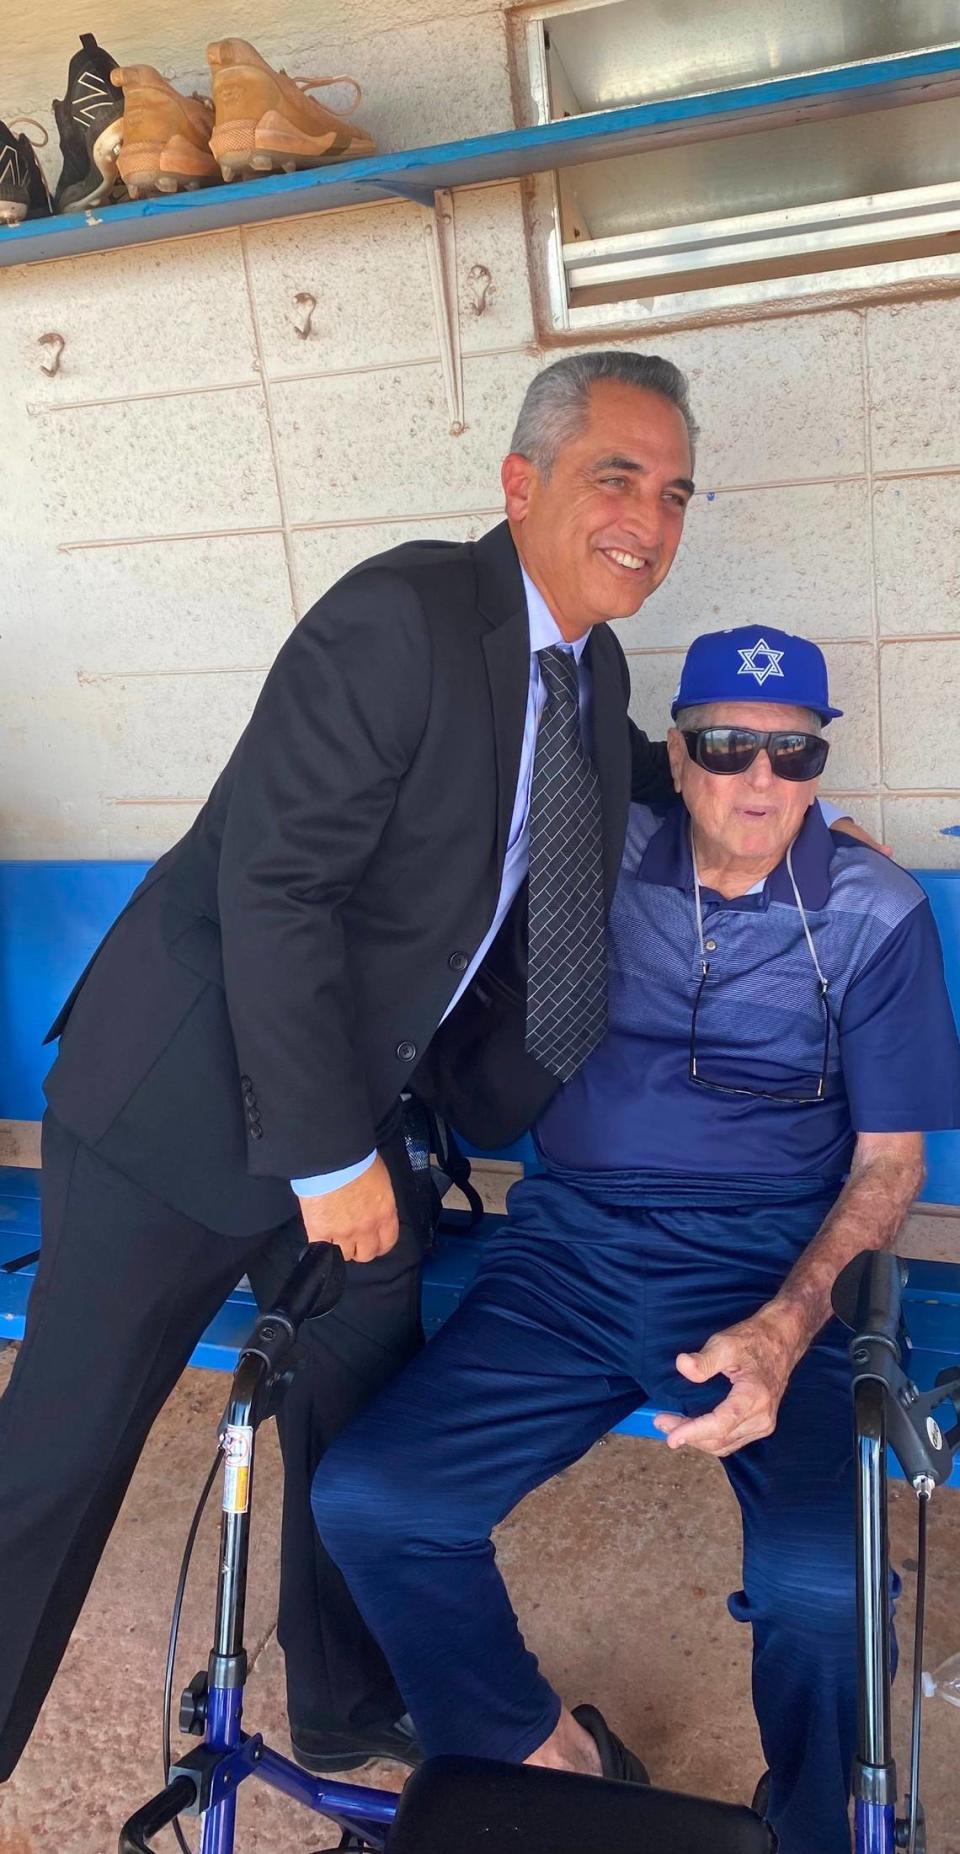 New Miami Dade College baseball coach Lazaro Llanes poses for a photo with former Sharks coaching legend Steve Hertz.